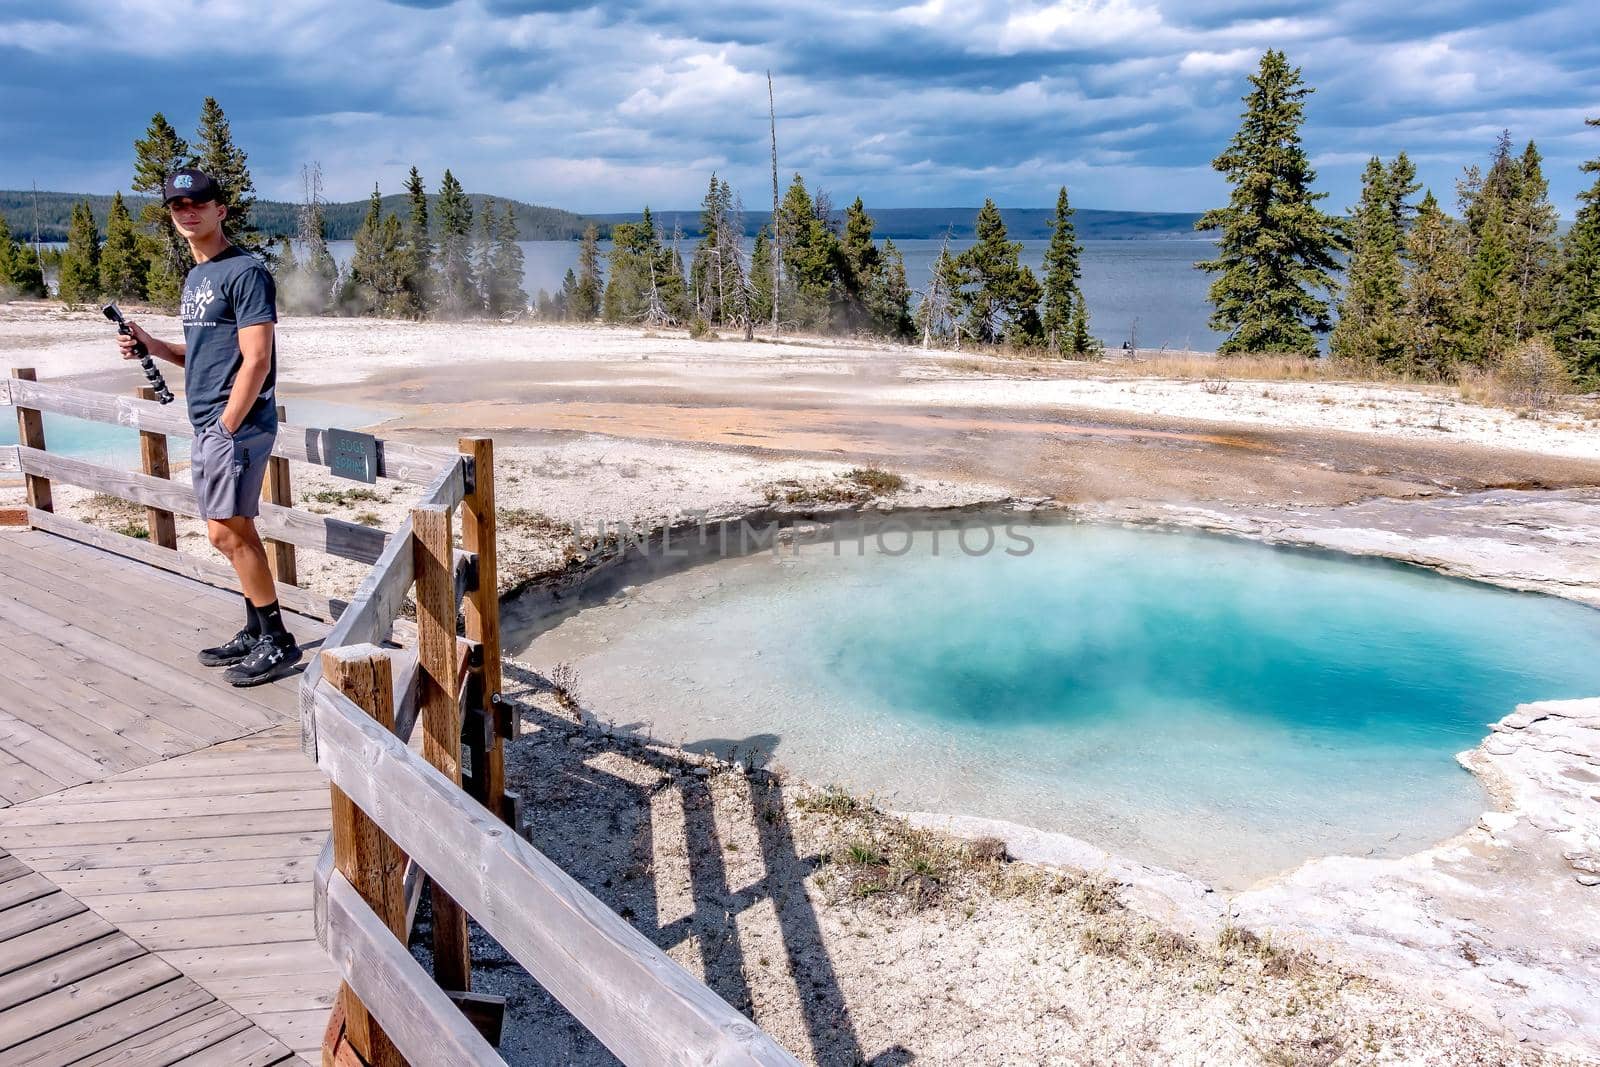 Hot thermal spring Abyss Pool in Yellowstone National Park, West Thumb Geyser Basin area, Wyoming, USA by digidreamgrafix